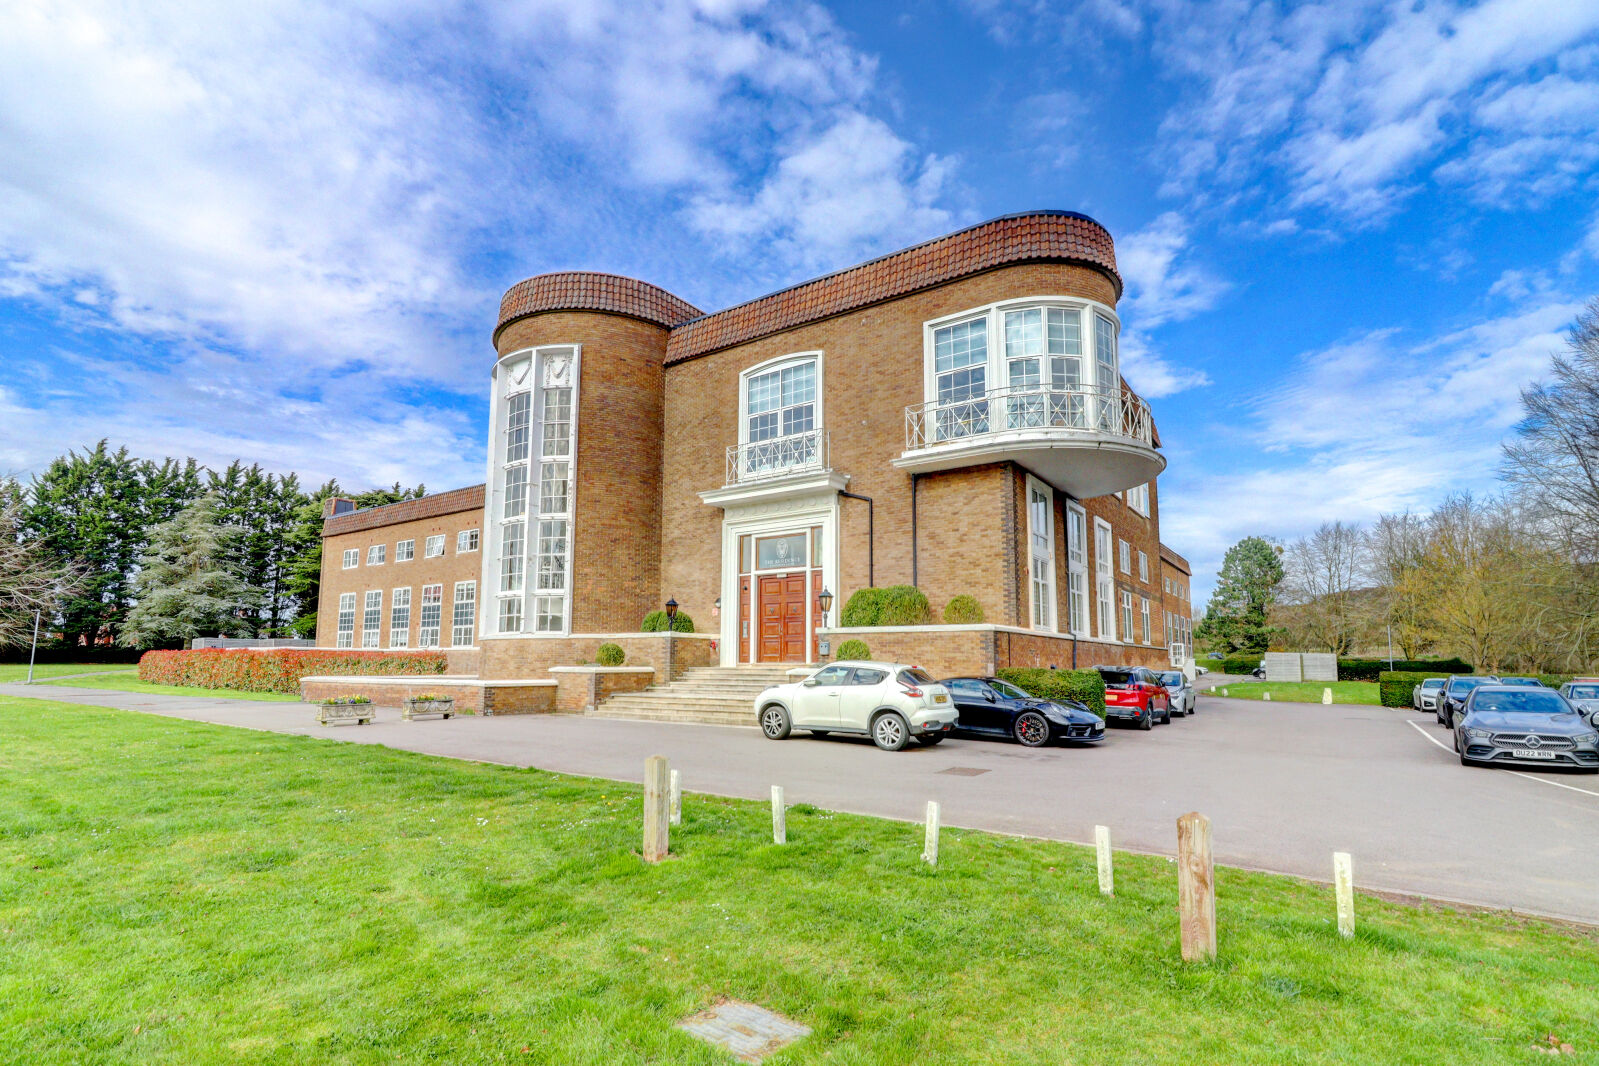 1 bedroom  flat for sale Wycombe Road, Saunderton, HP14, main image